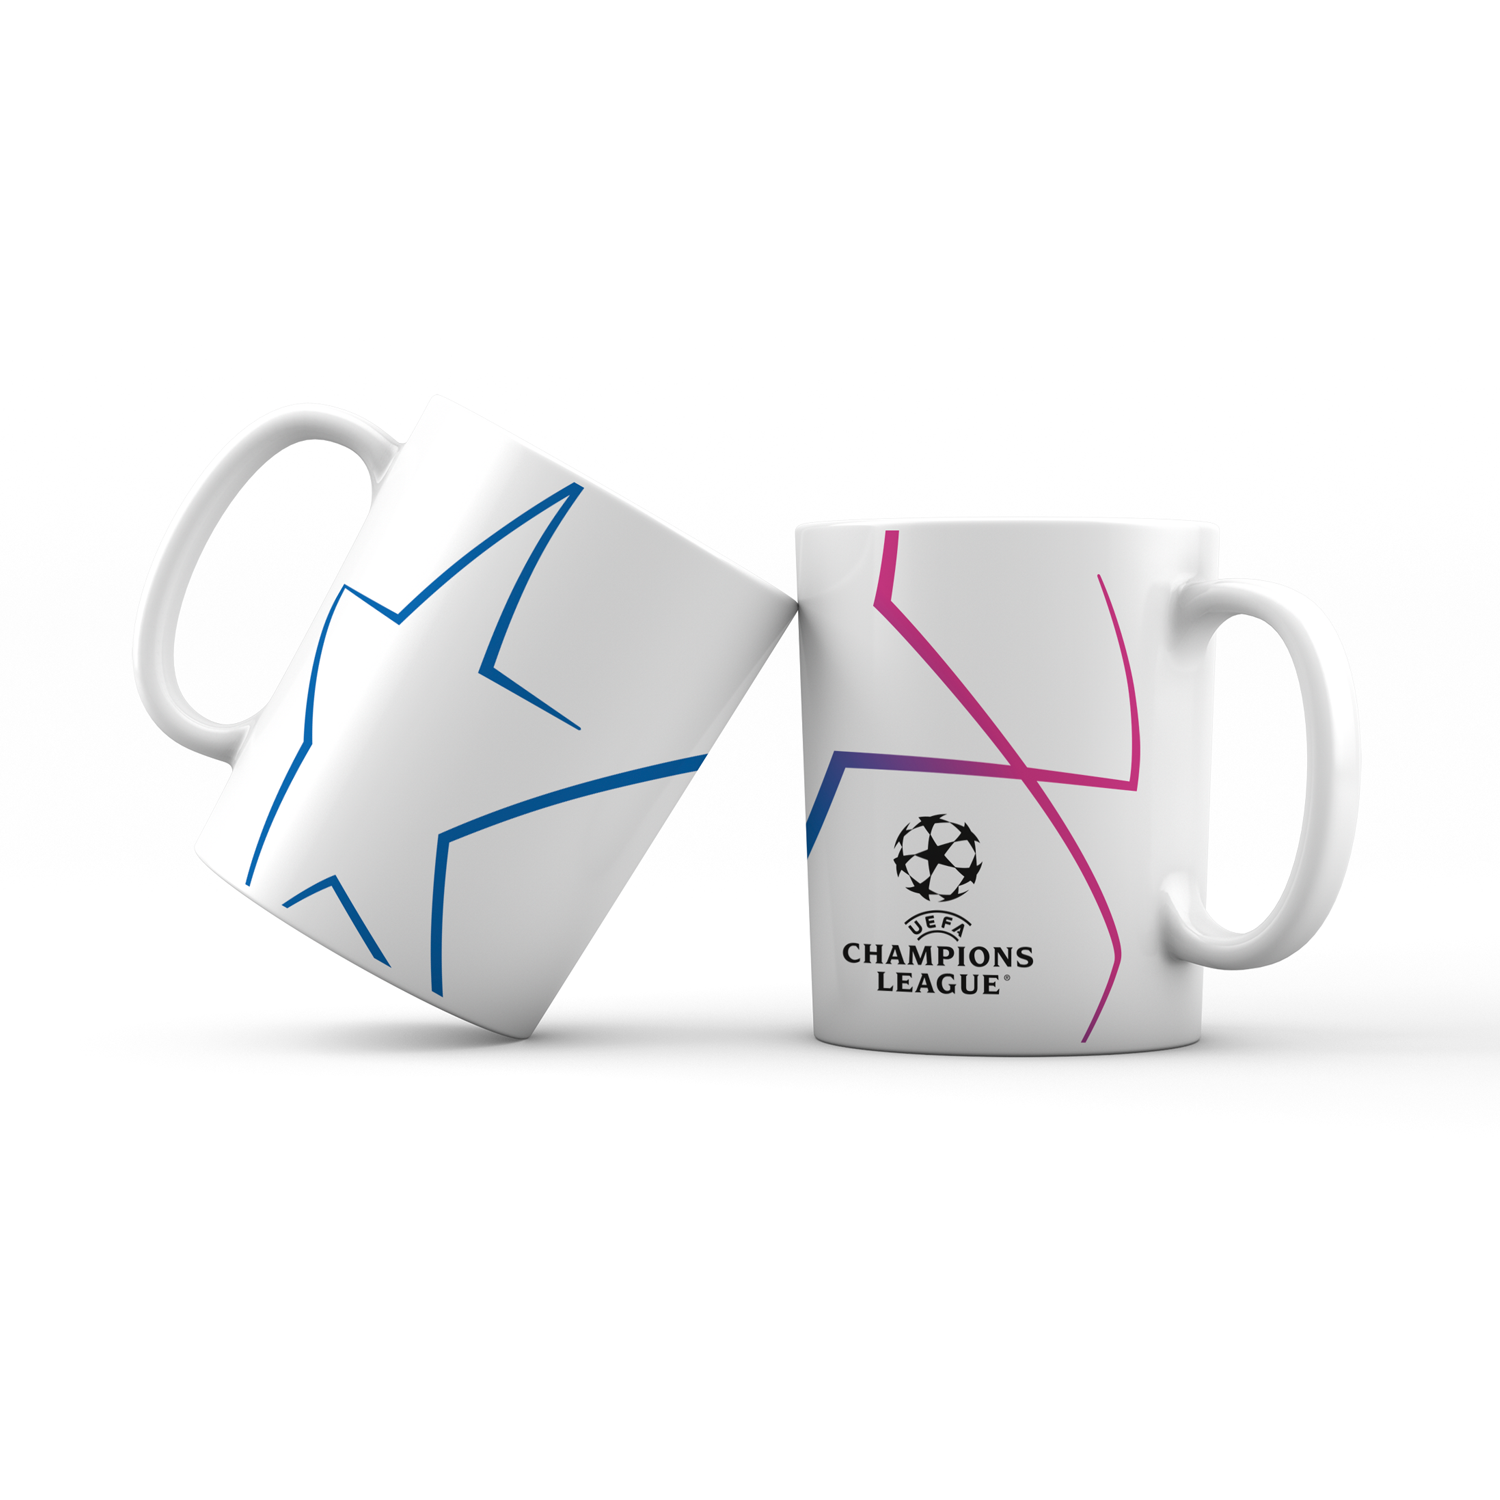 UEFA Champions League Blue/Pink Starball Mug UEFA Club Competitions Online Store